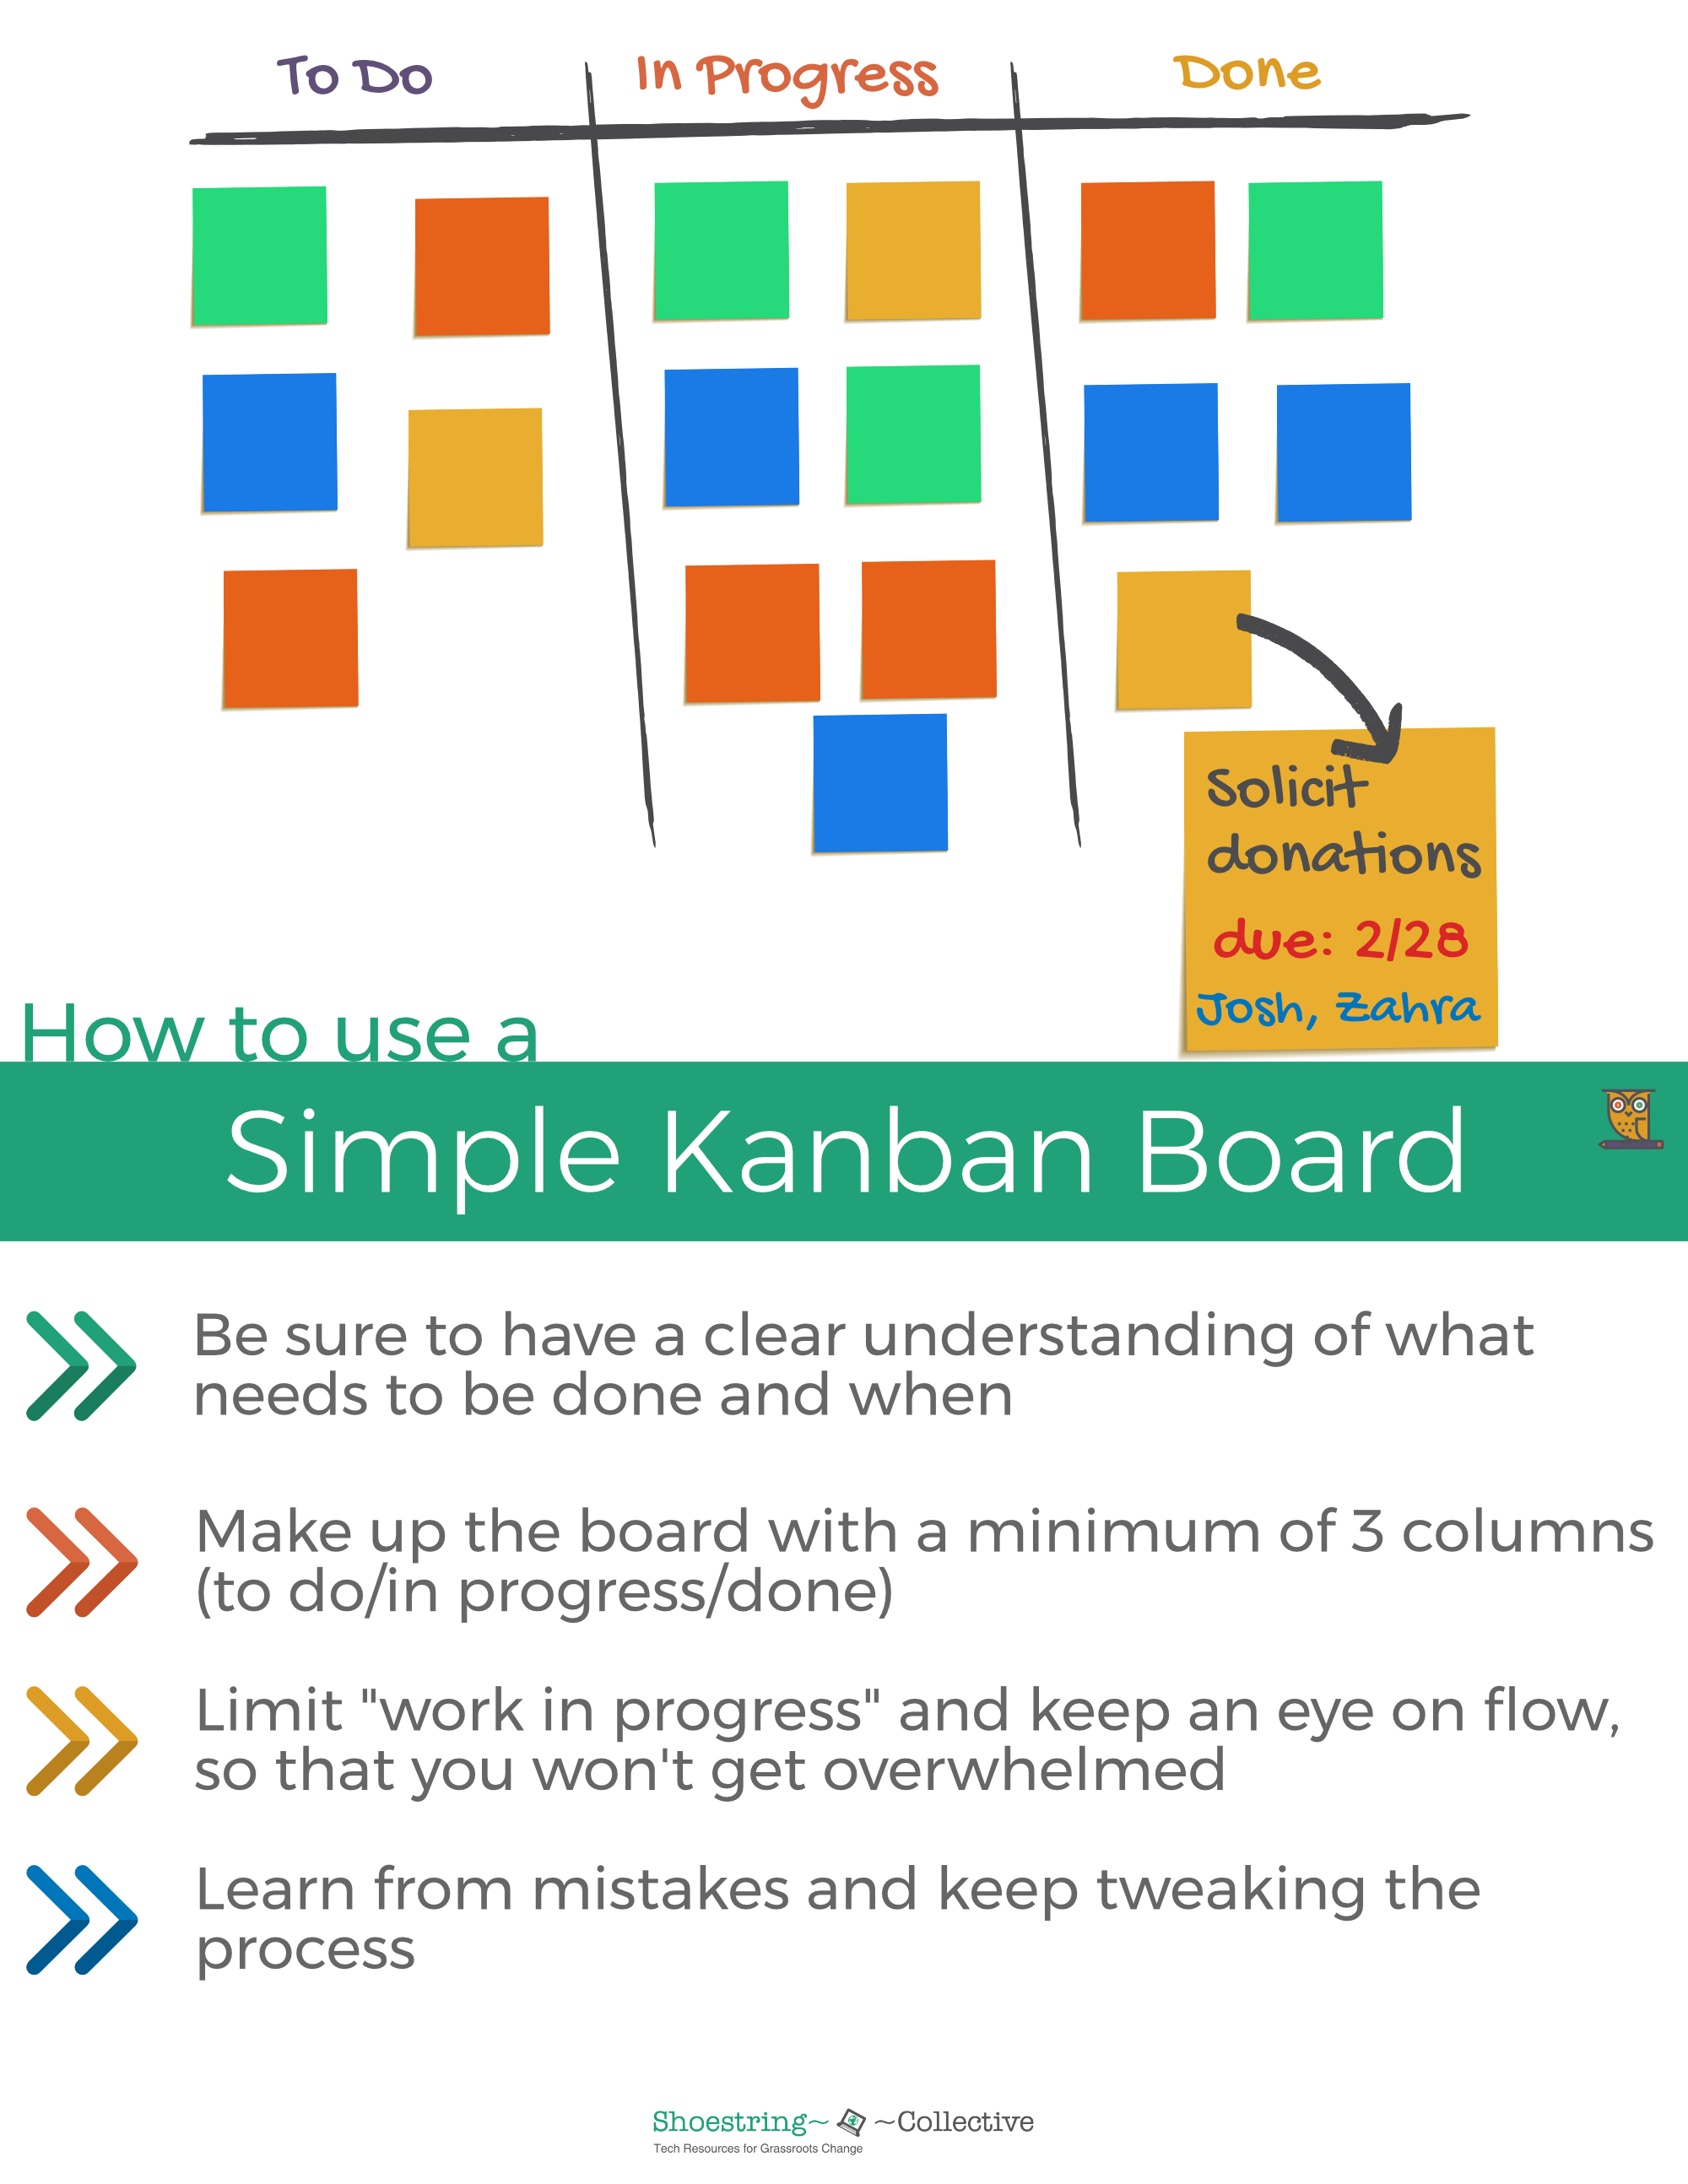 How to Use a Simple Kanban Board